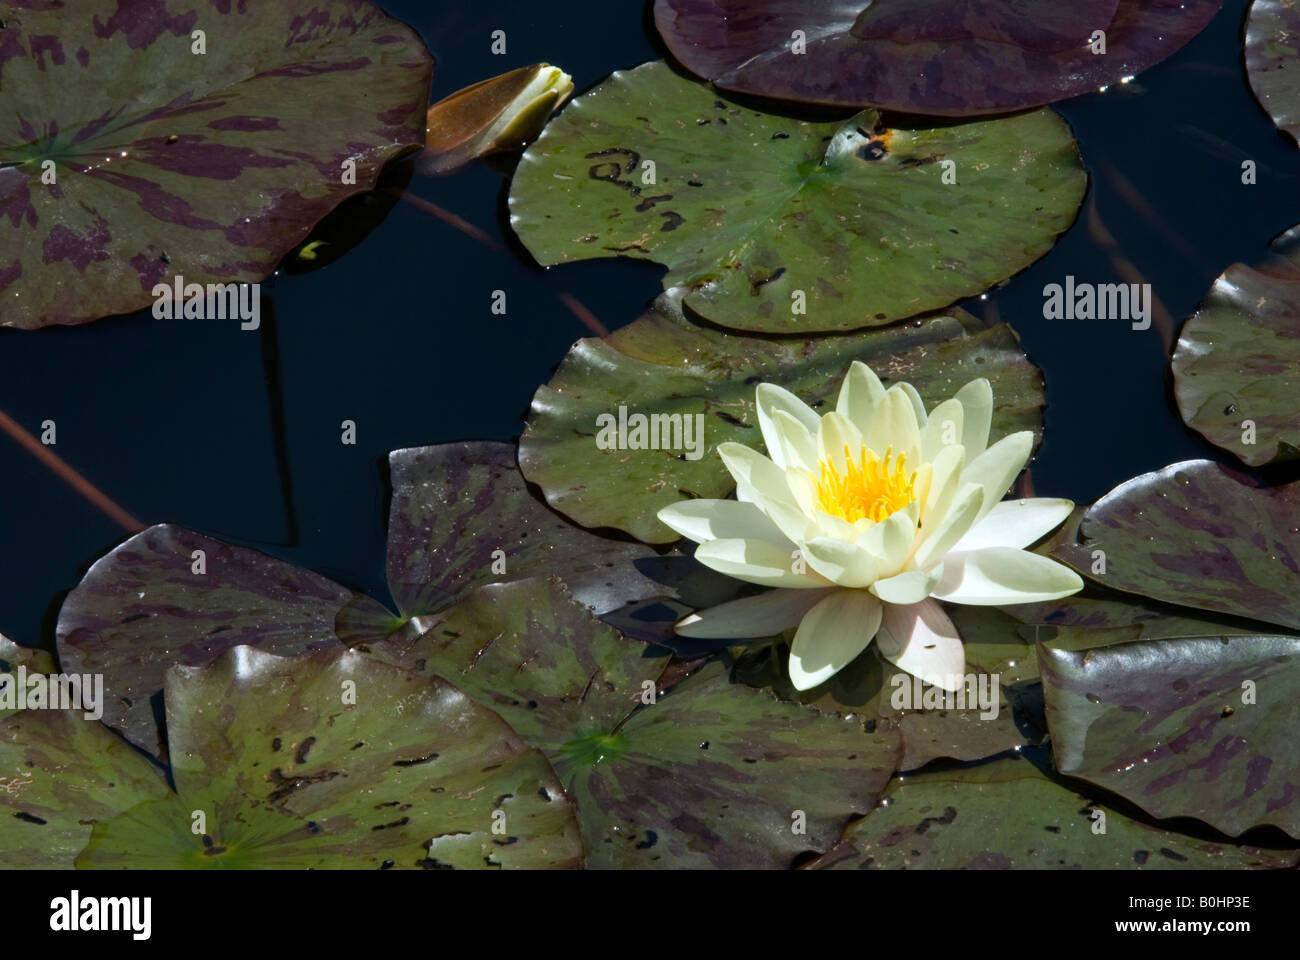 Waterlily and lily pads (Nymphaea), Matzen Palace Gardens, Tyrol, Austria, Europe Stock Photo